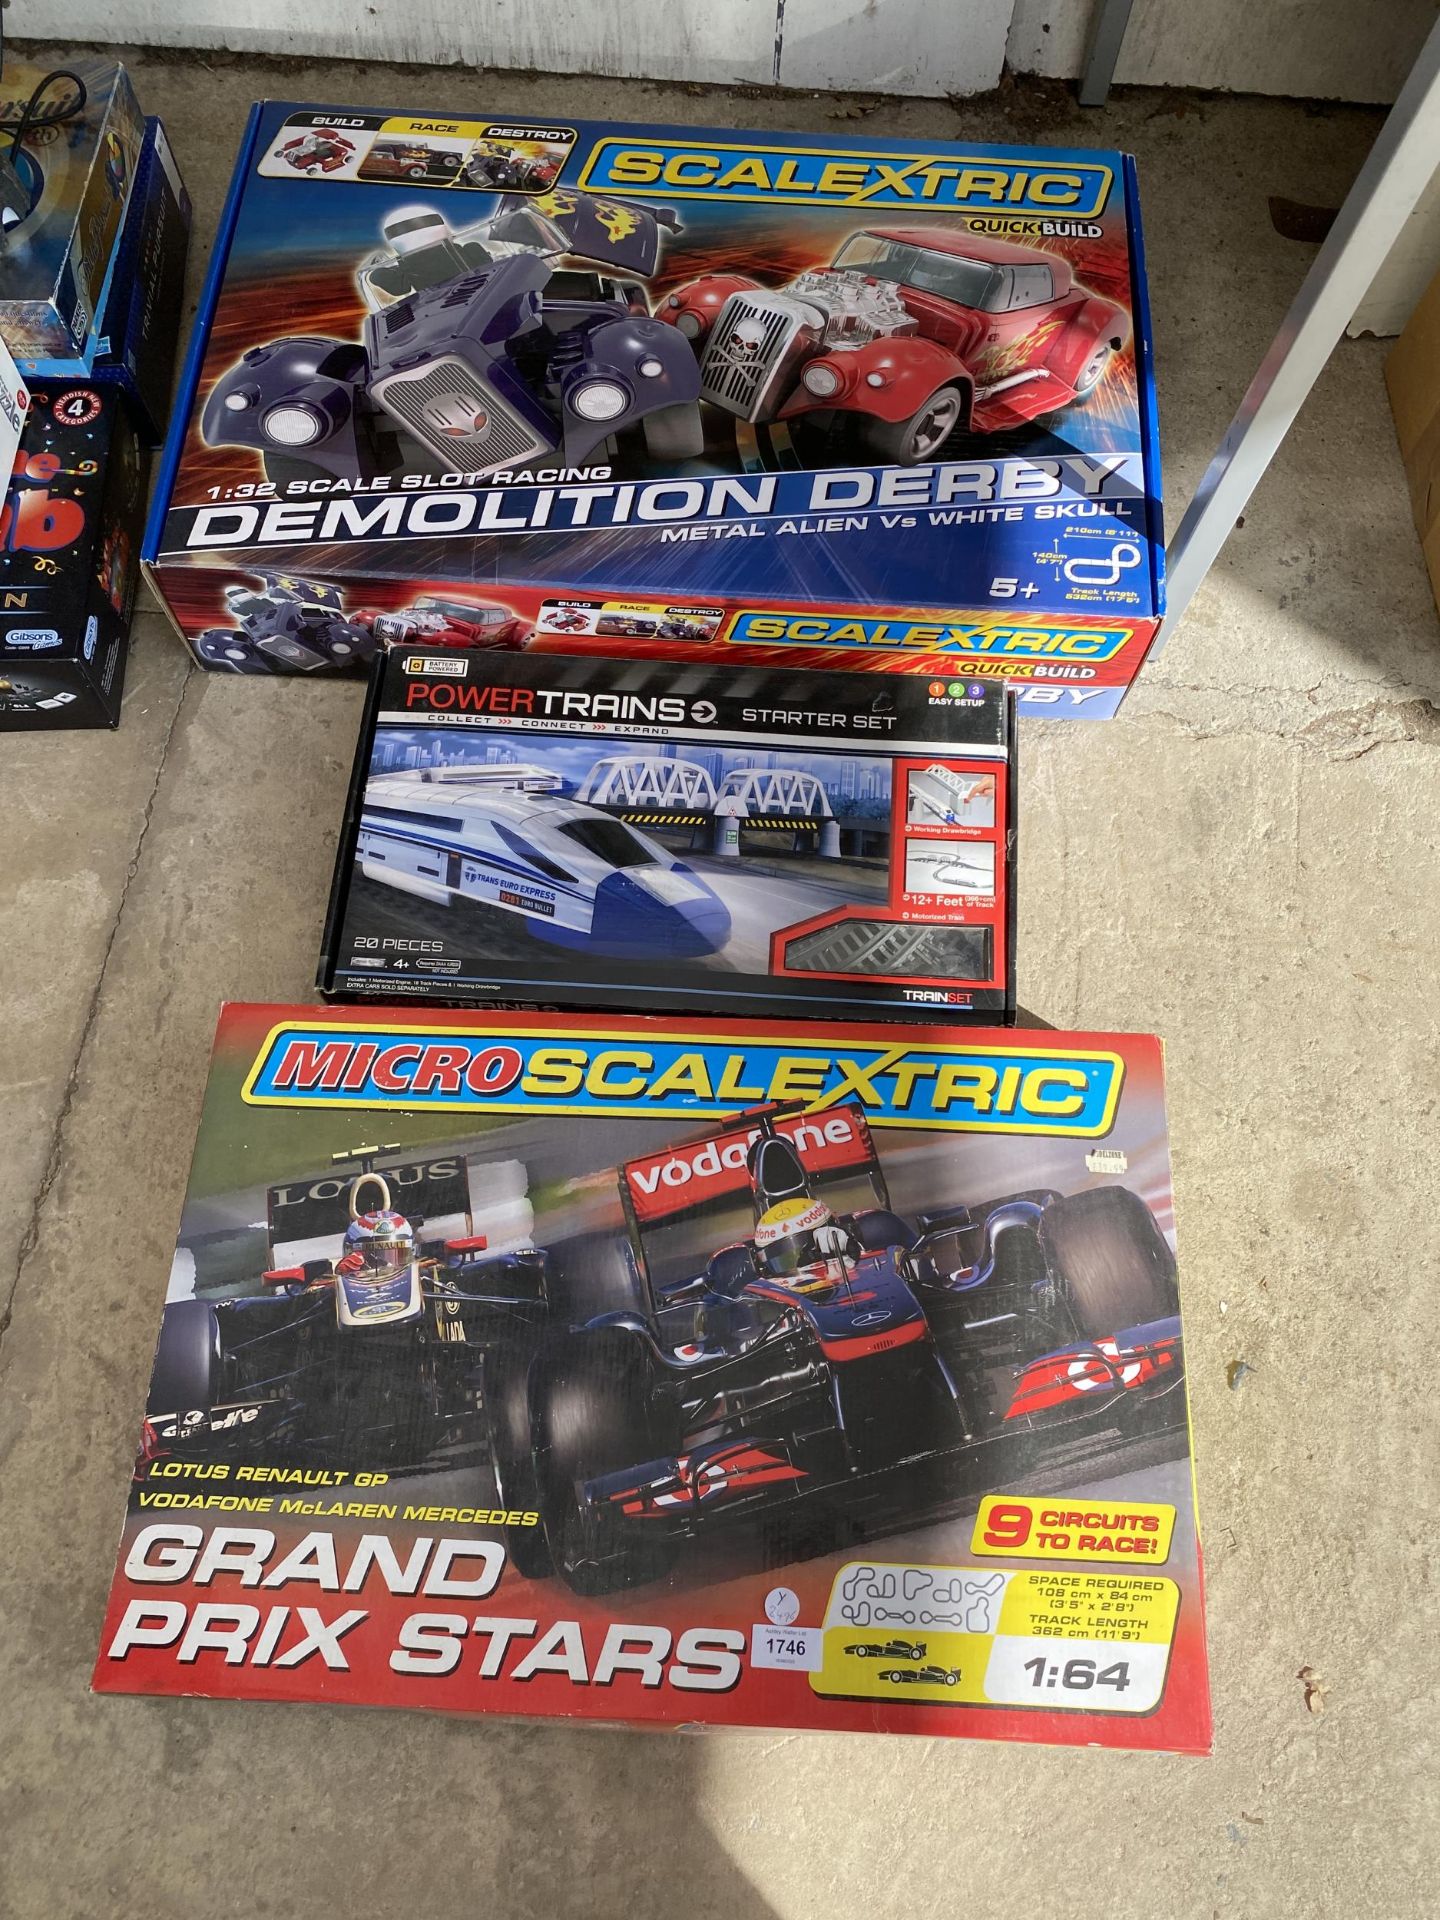 A GROUP OF THREE BOXED TOY ITEMS- SCALEXTRIC DEMOLITION DERBY & GRAND PRIX STARS